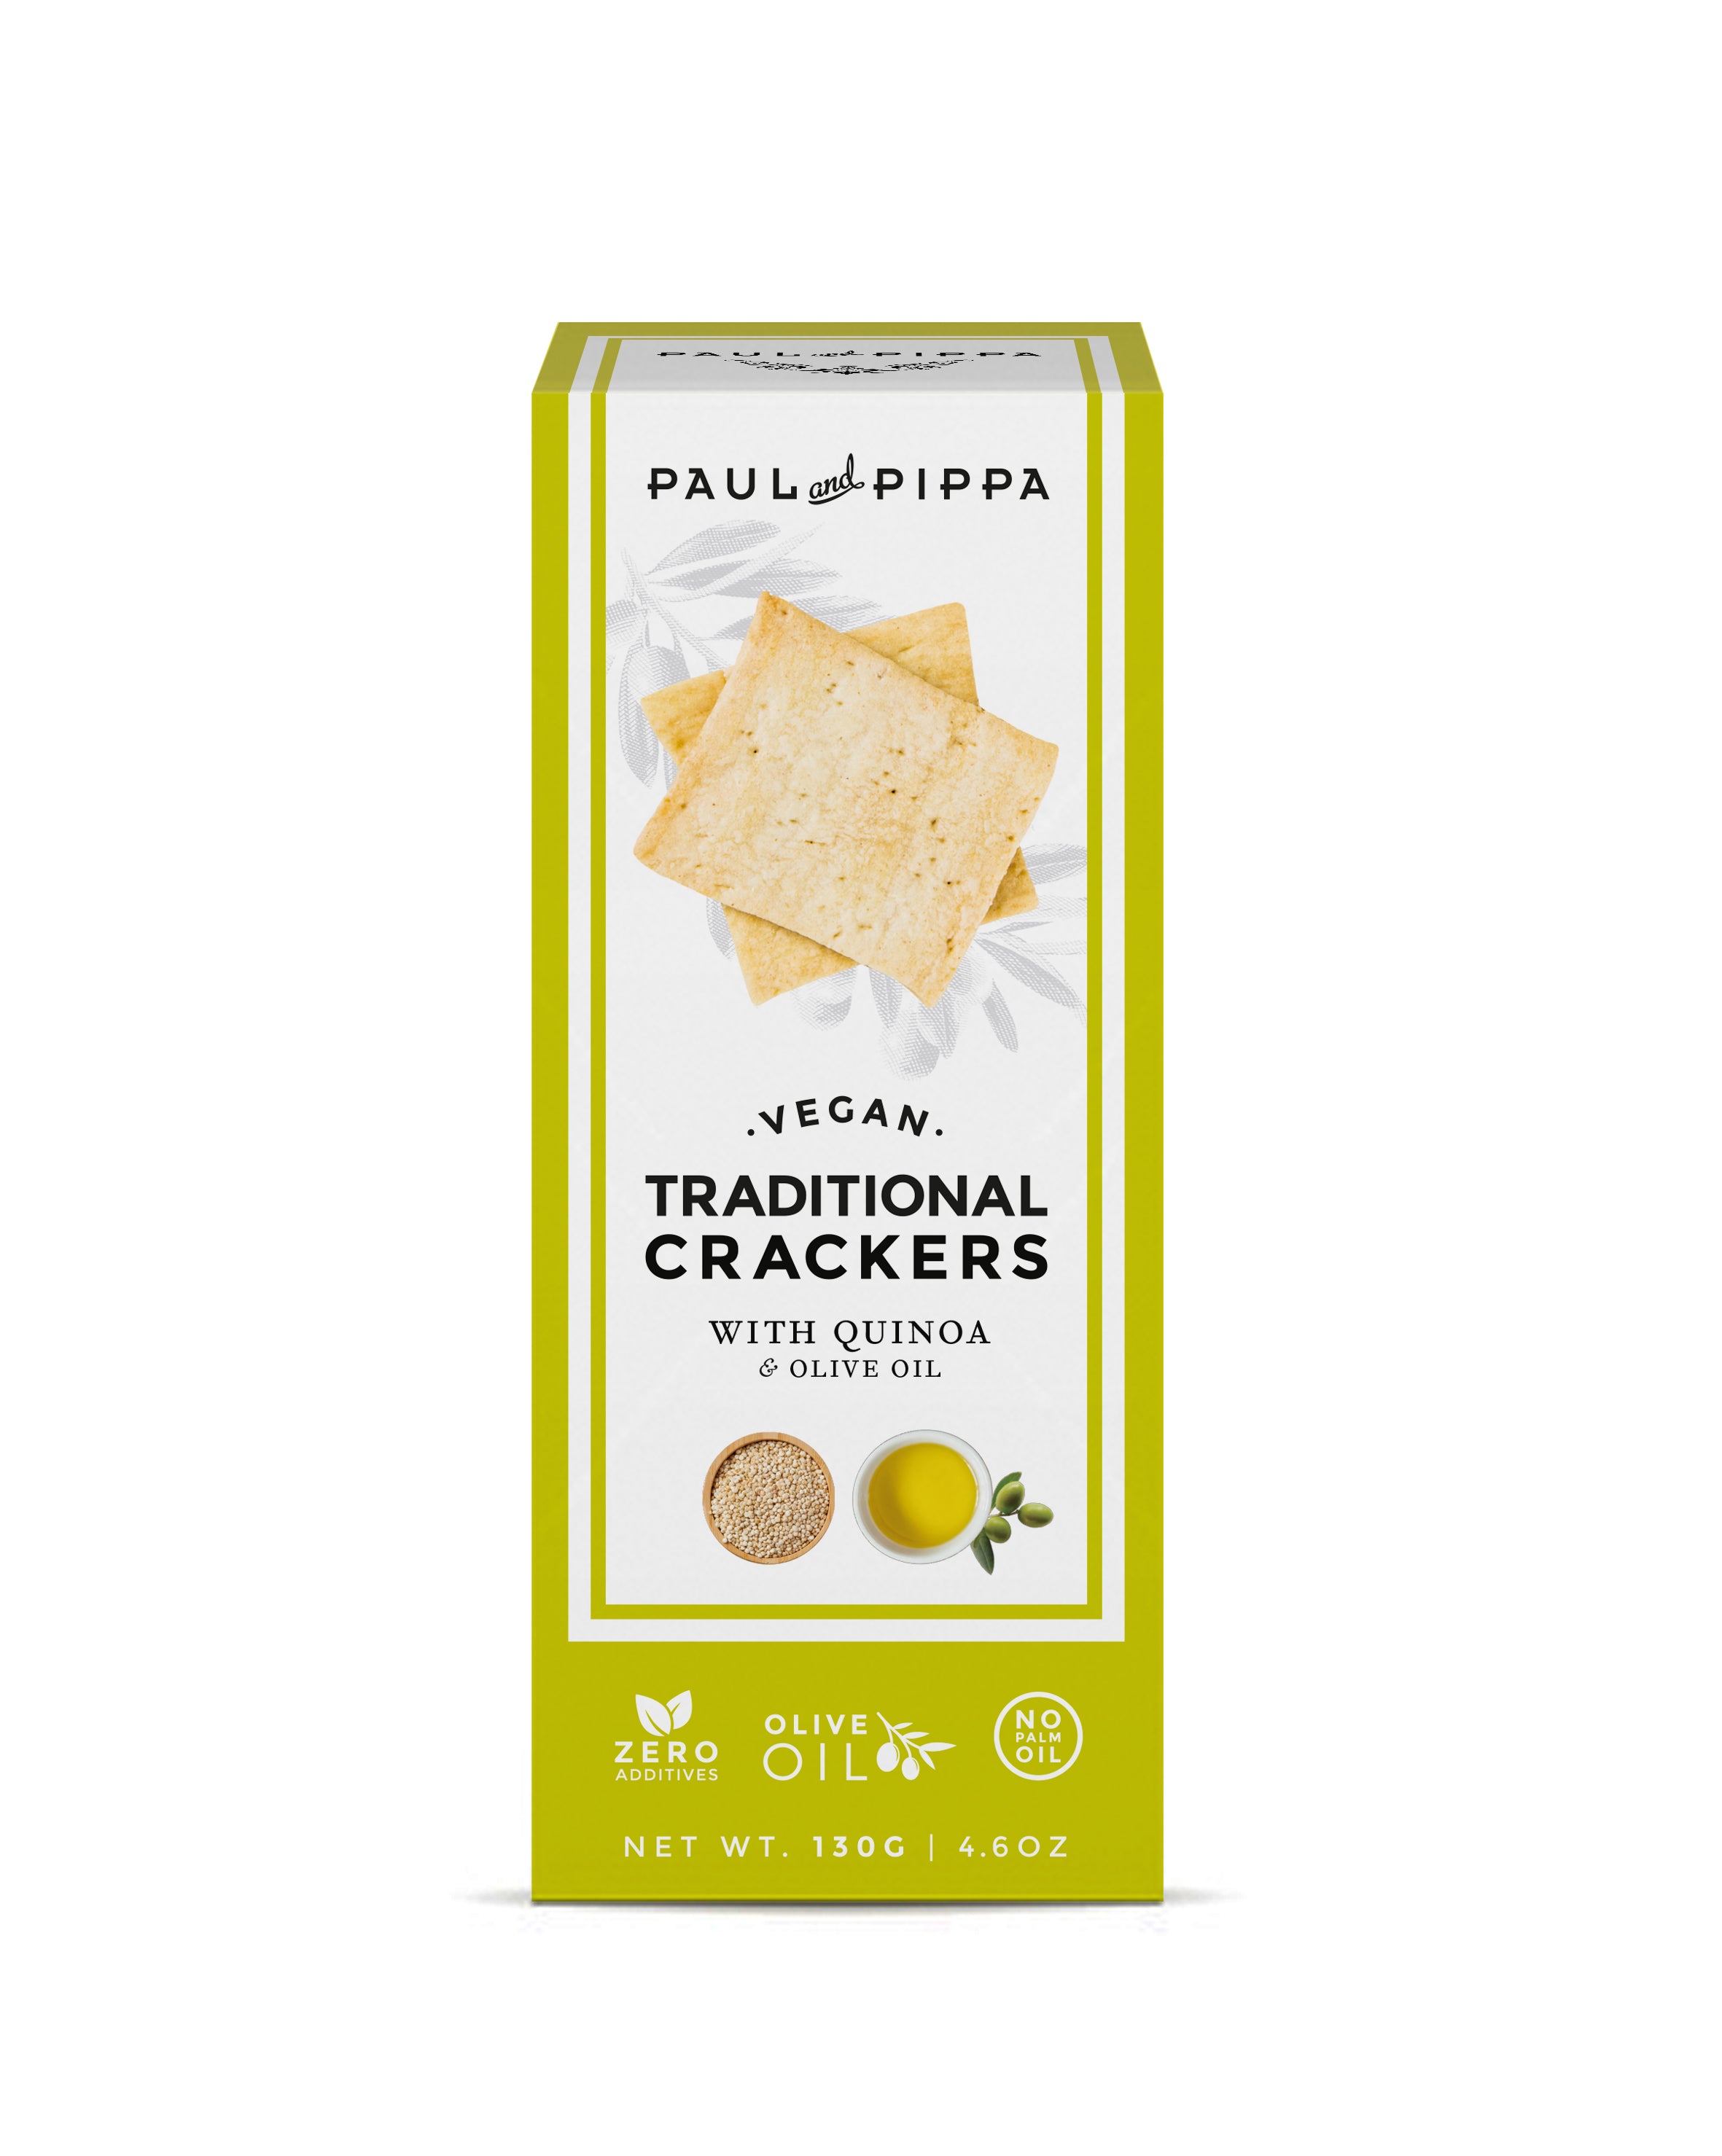 Regular Plain Crackers with Quinoa and Olive Oil